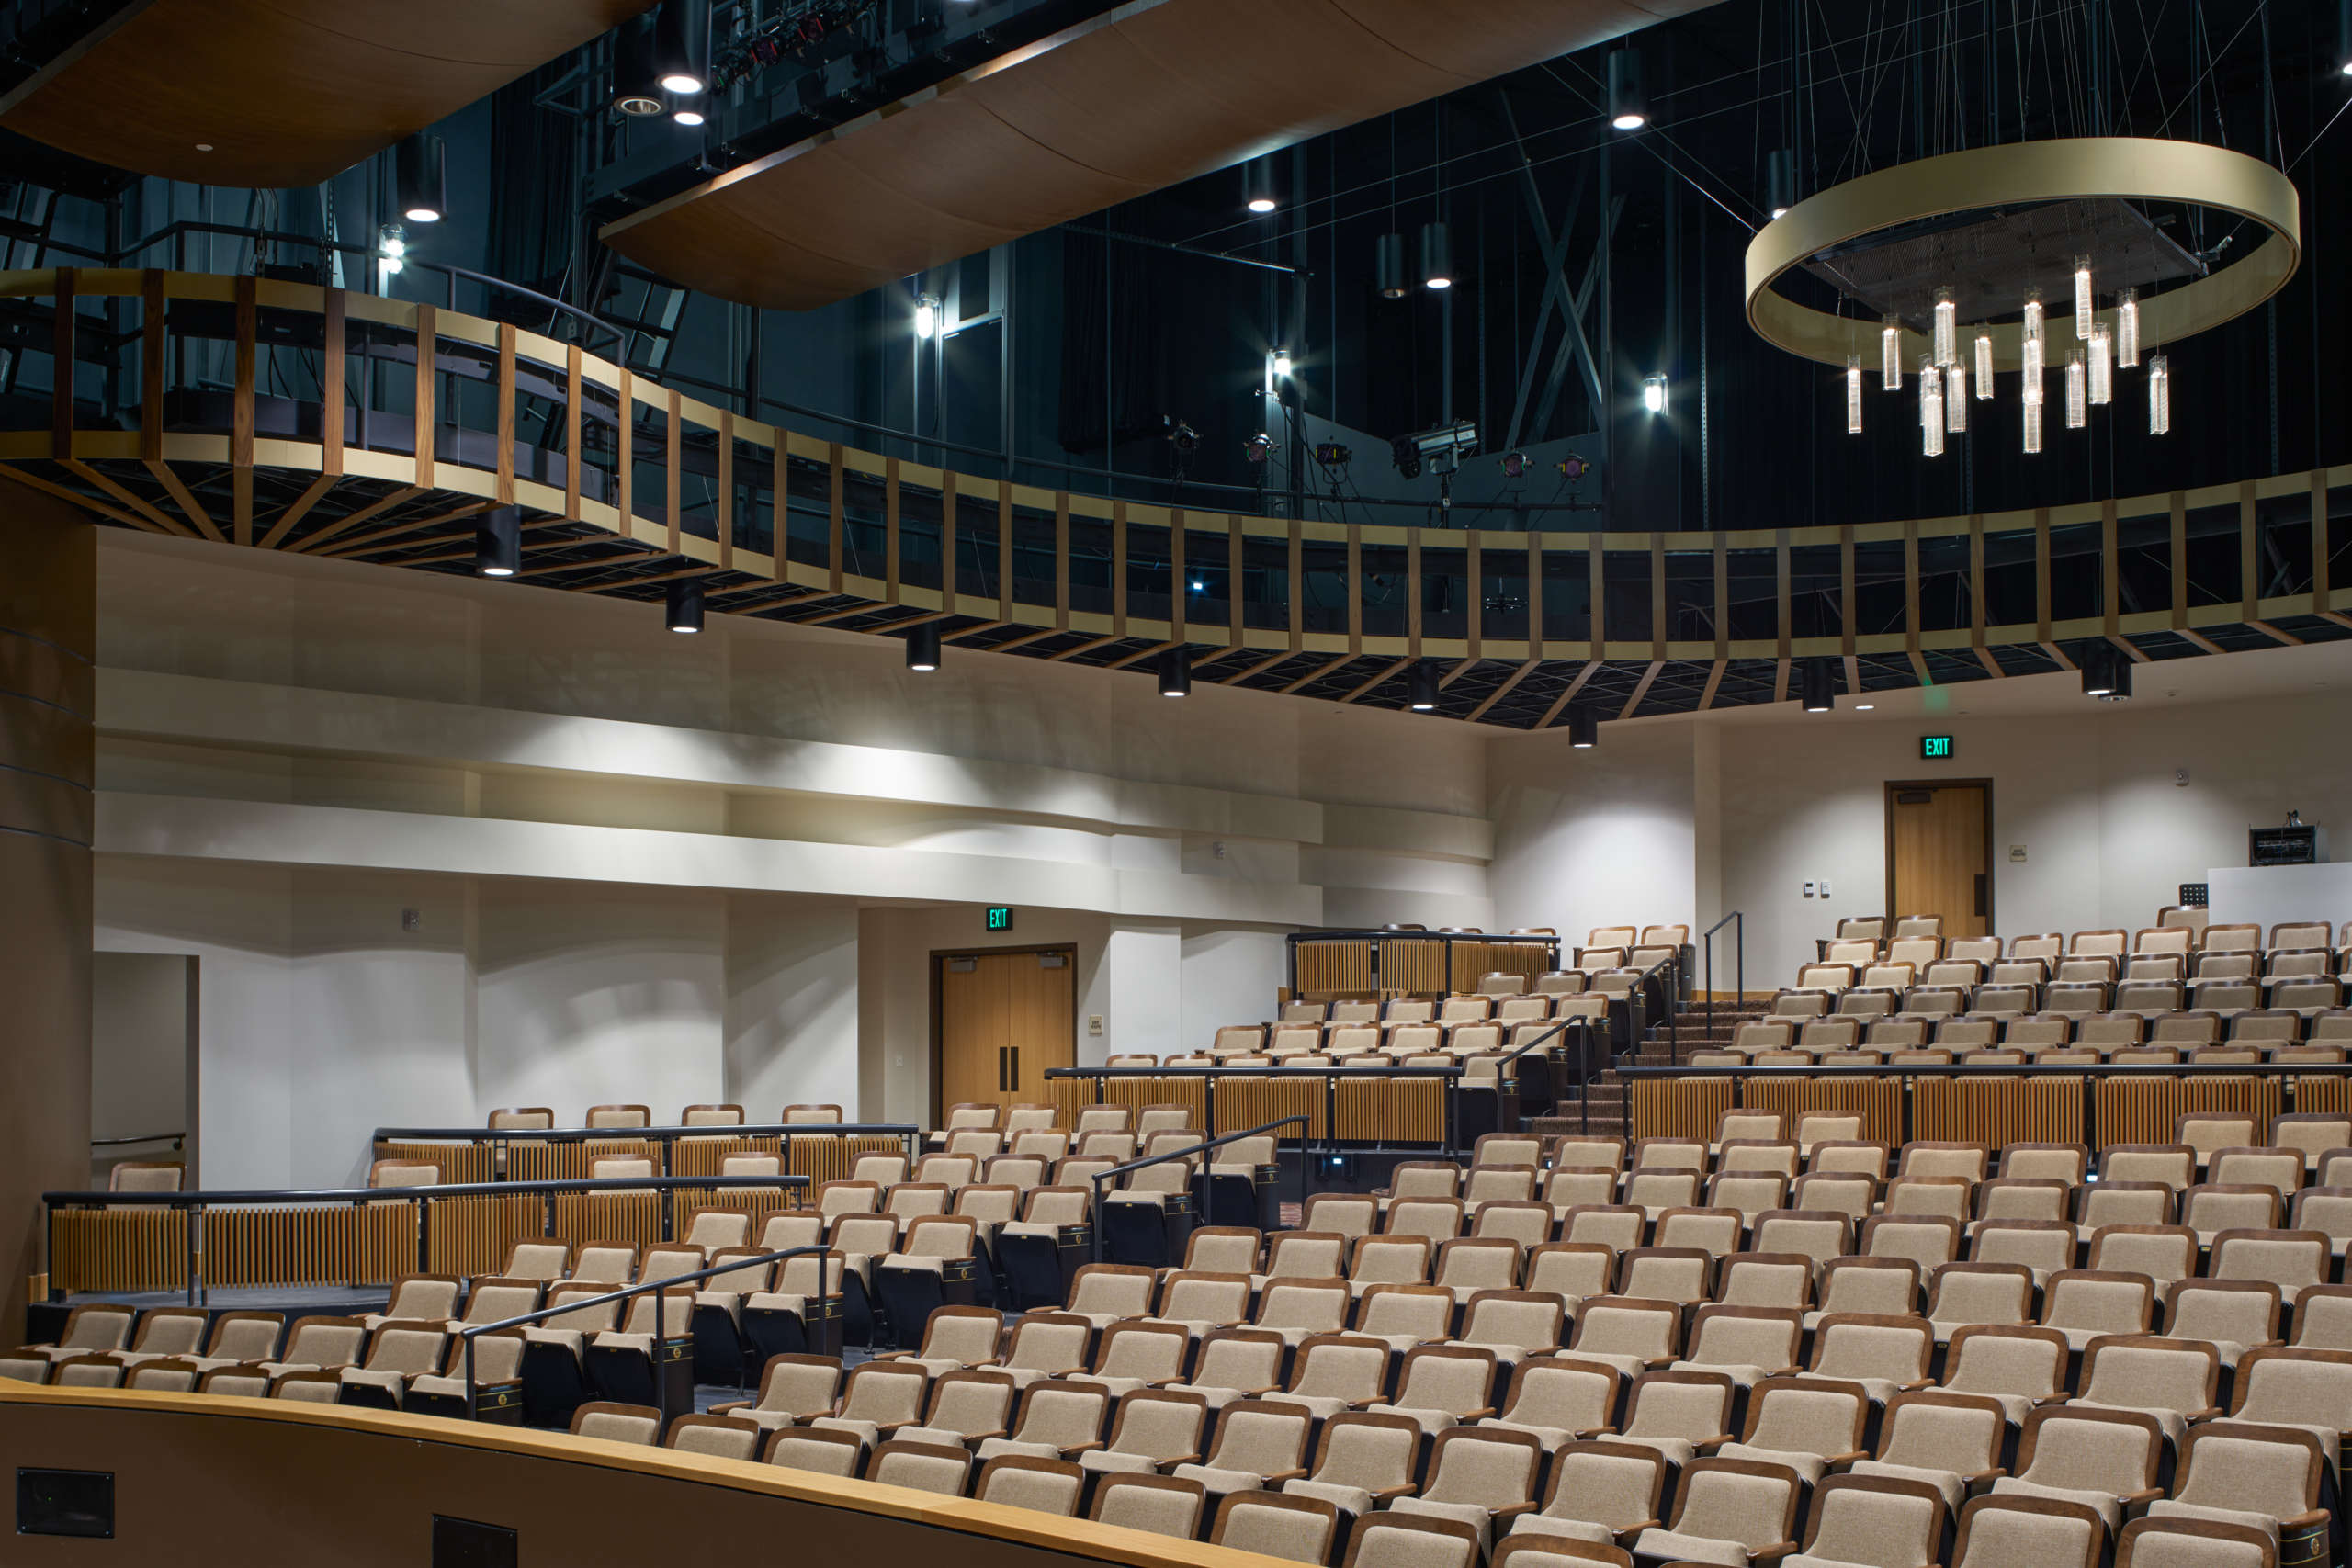 Seating at St. Helena High School's Auditorium/Performing Arts Center